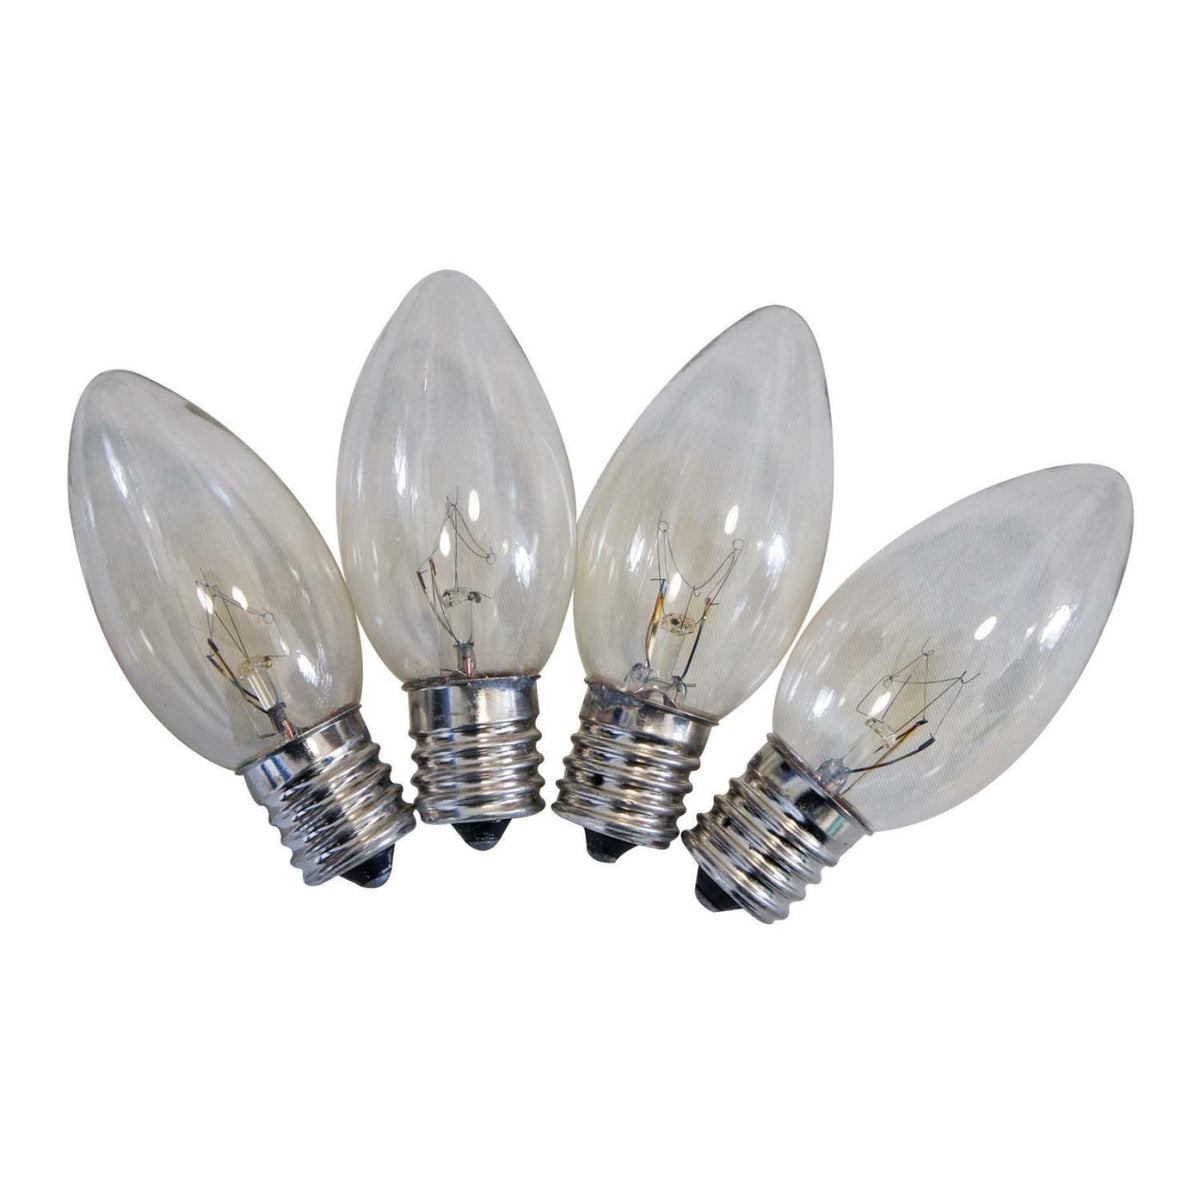 Celebrations UYRT41A1 C7 Replacement Bulbs, 5 W, Transparent, Clear